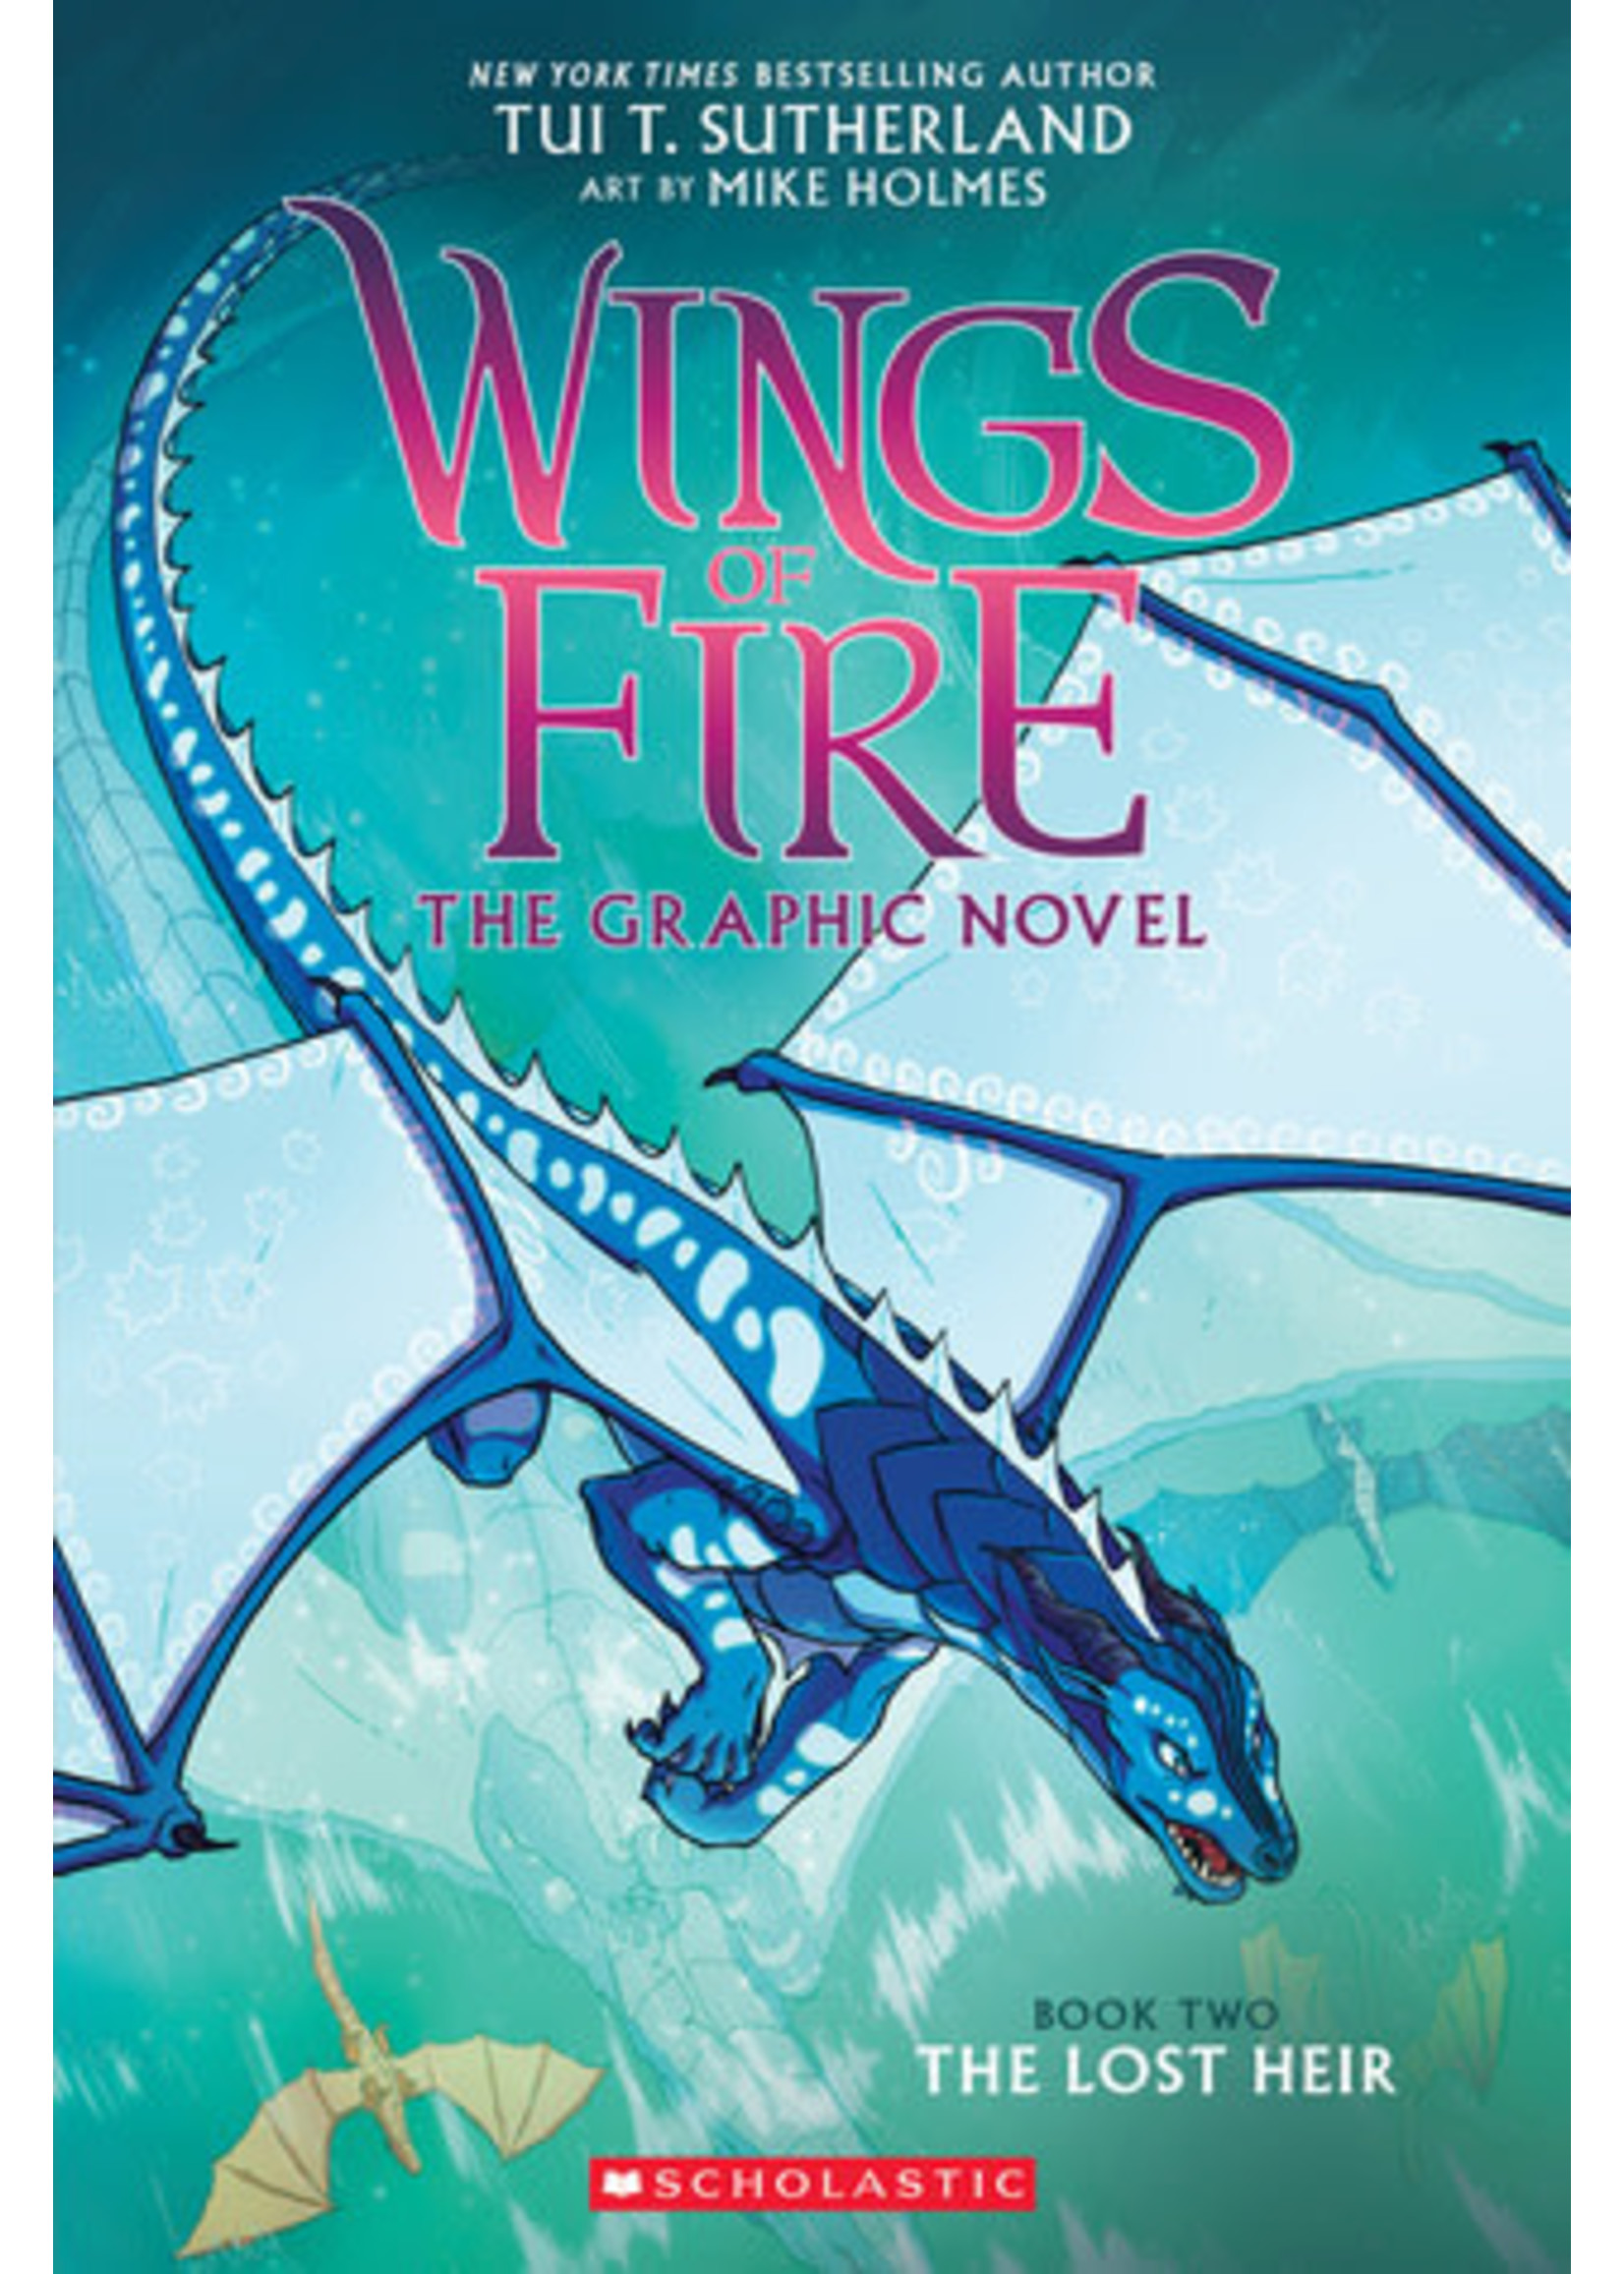 The Lost Heir (Wings of Fire Graphic Novel #2) by Tui T. Sutherland, Mike Holmes